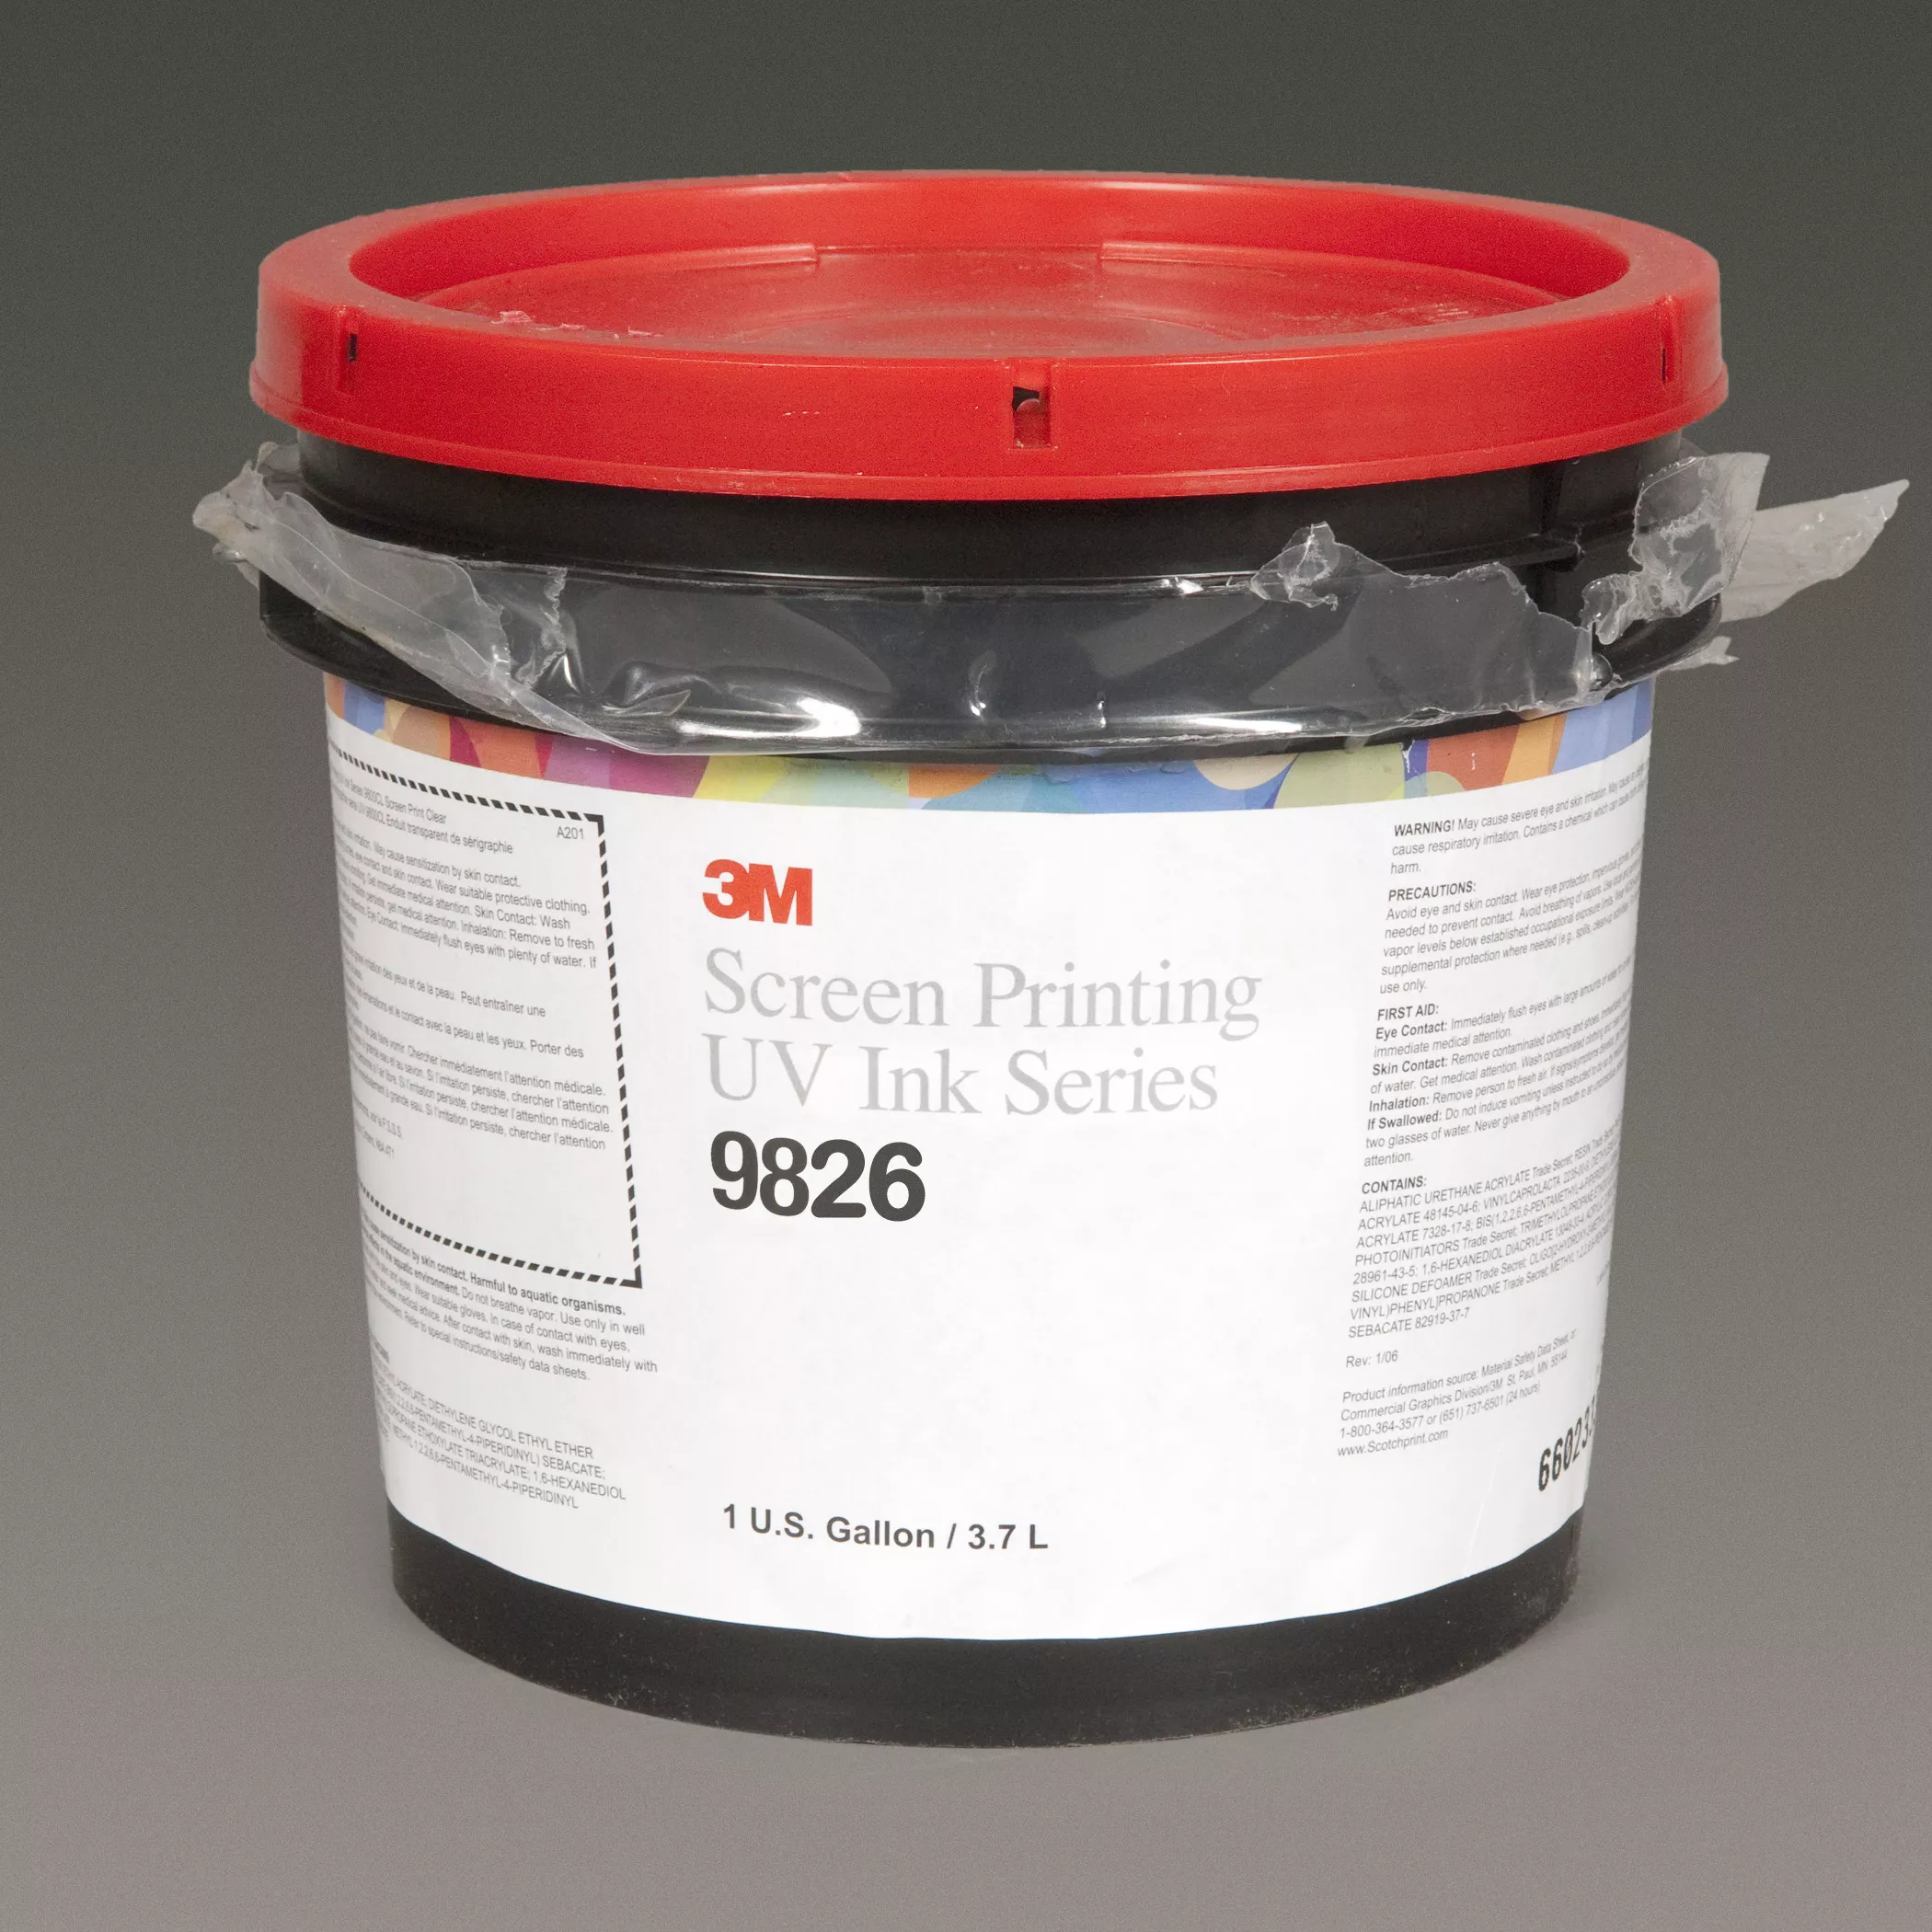 3M™ Screen Printing UV Ink 9826, Brick Red, 1 Gallon Container